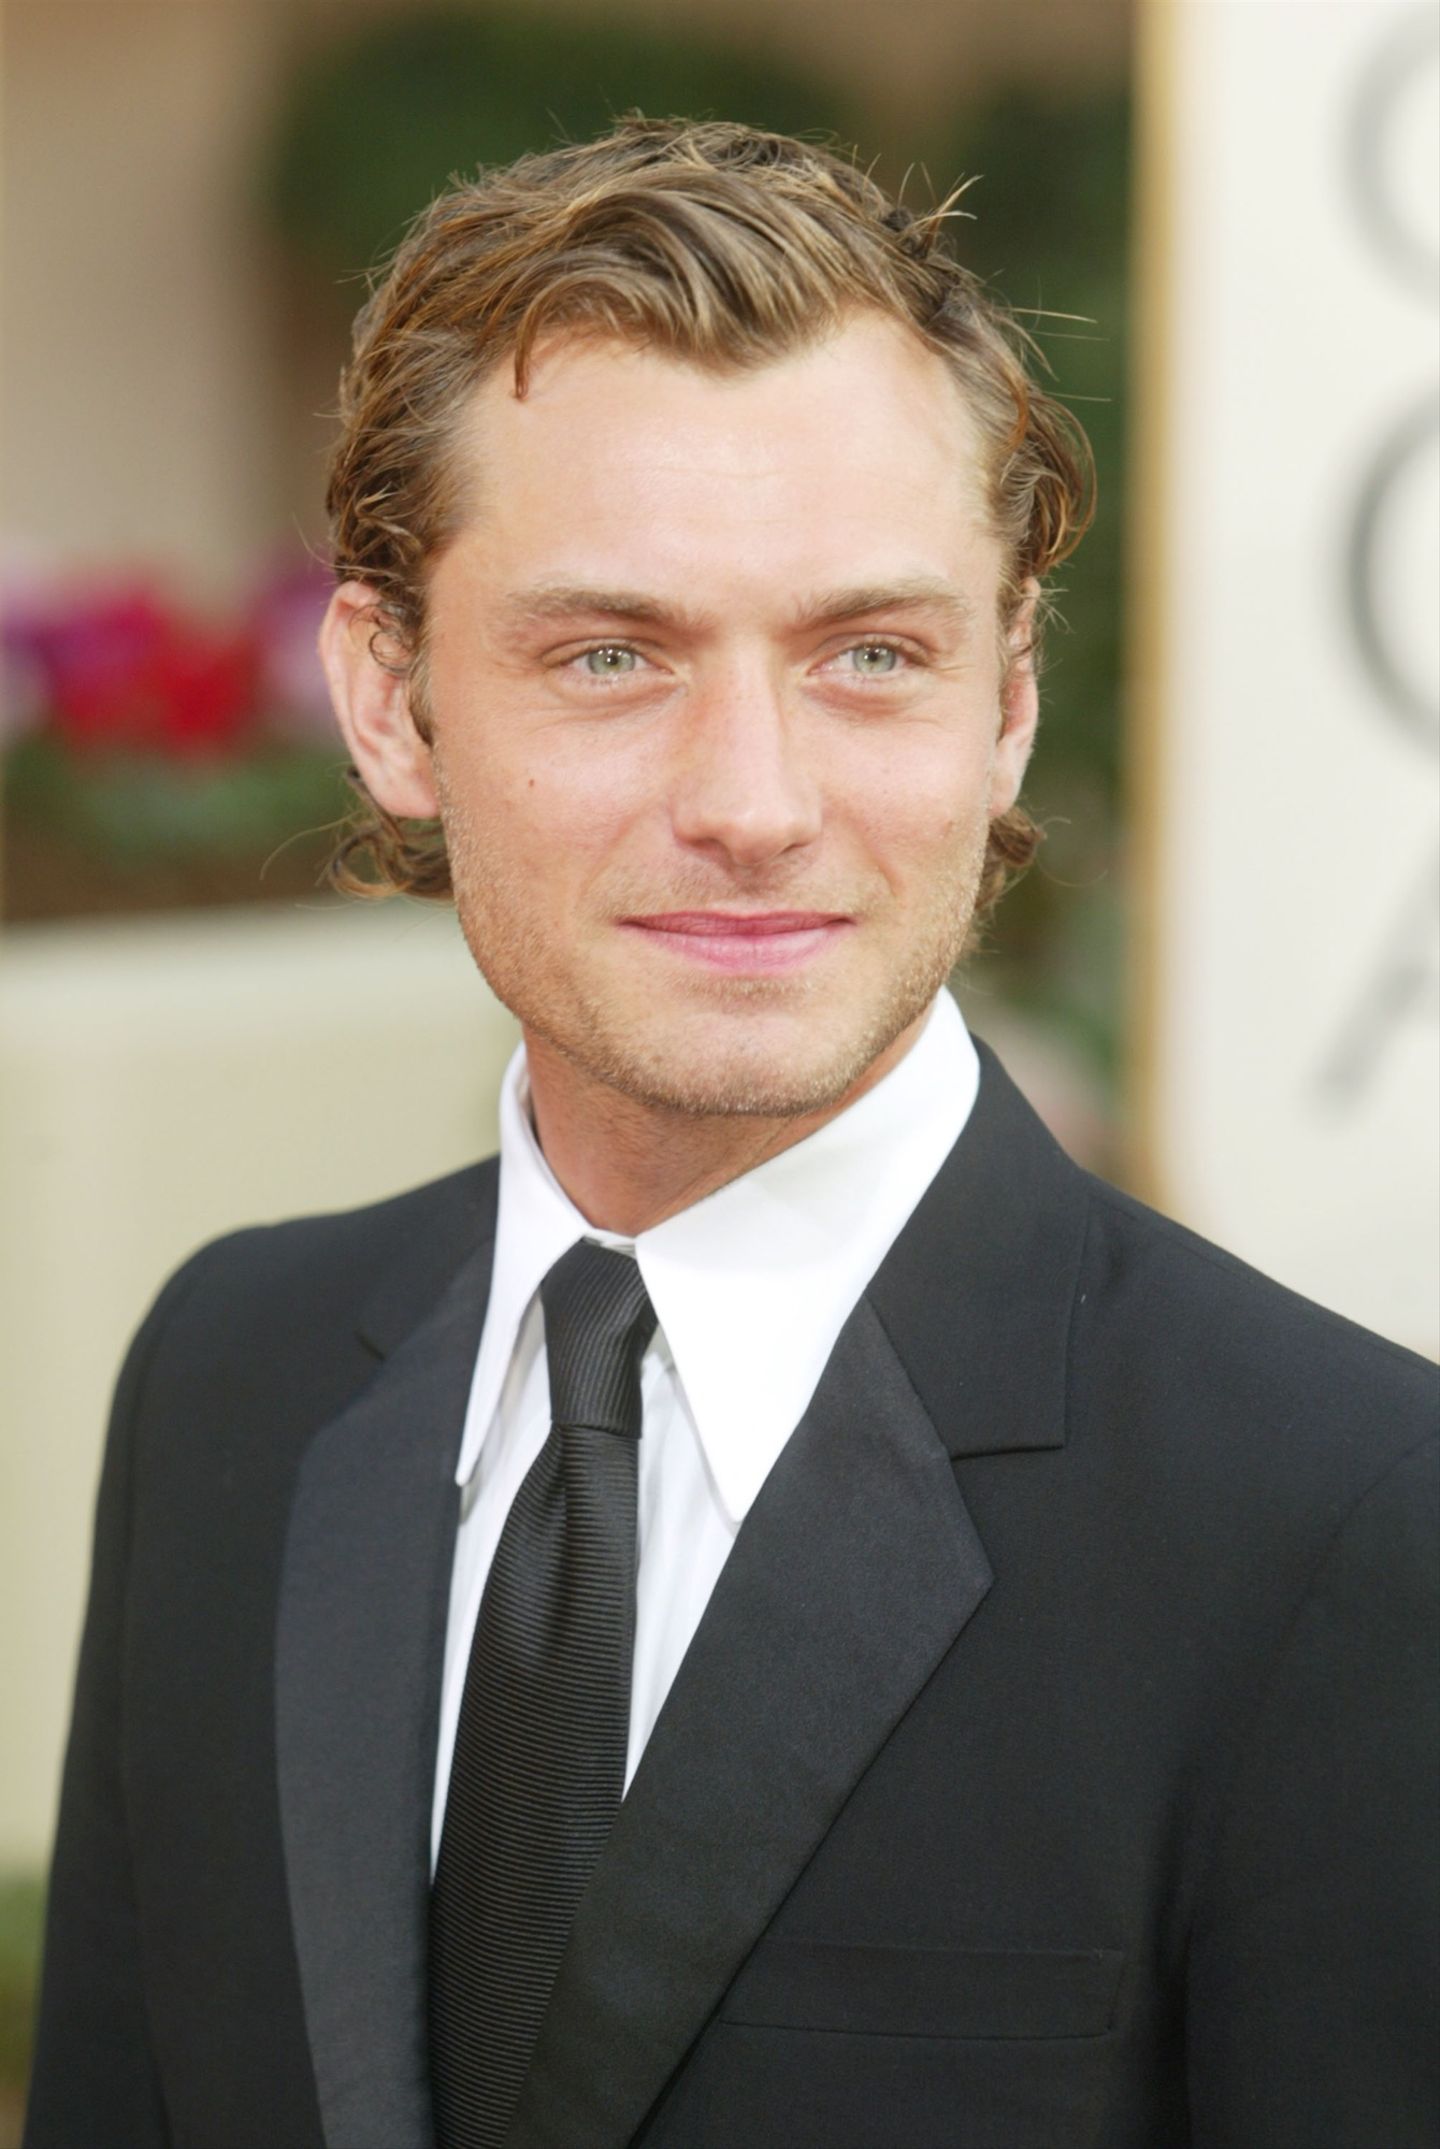 Sexiest Man Alive 2004 - Jude Law